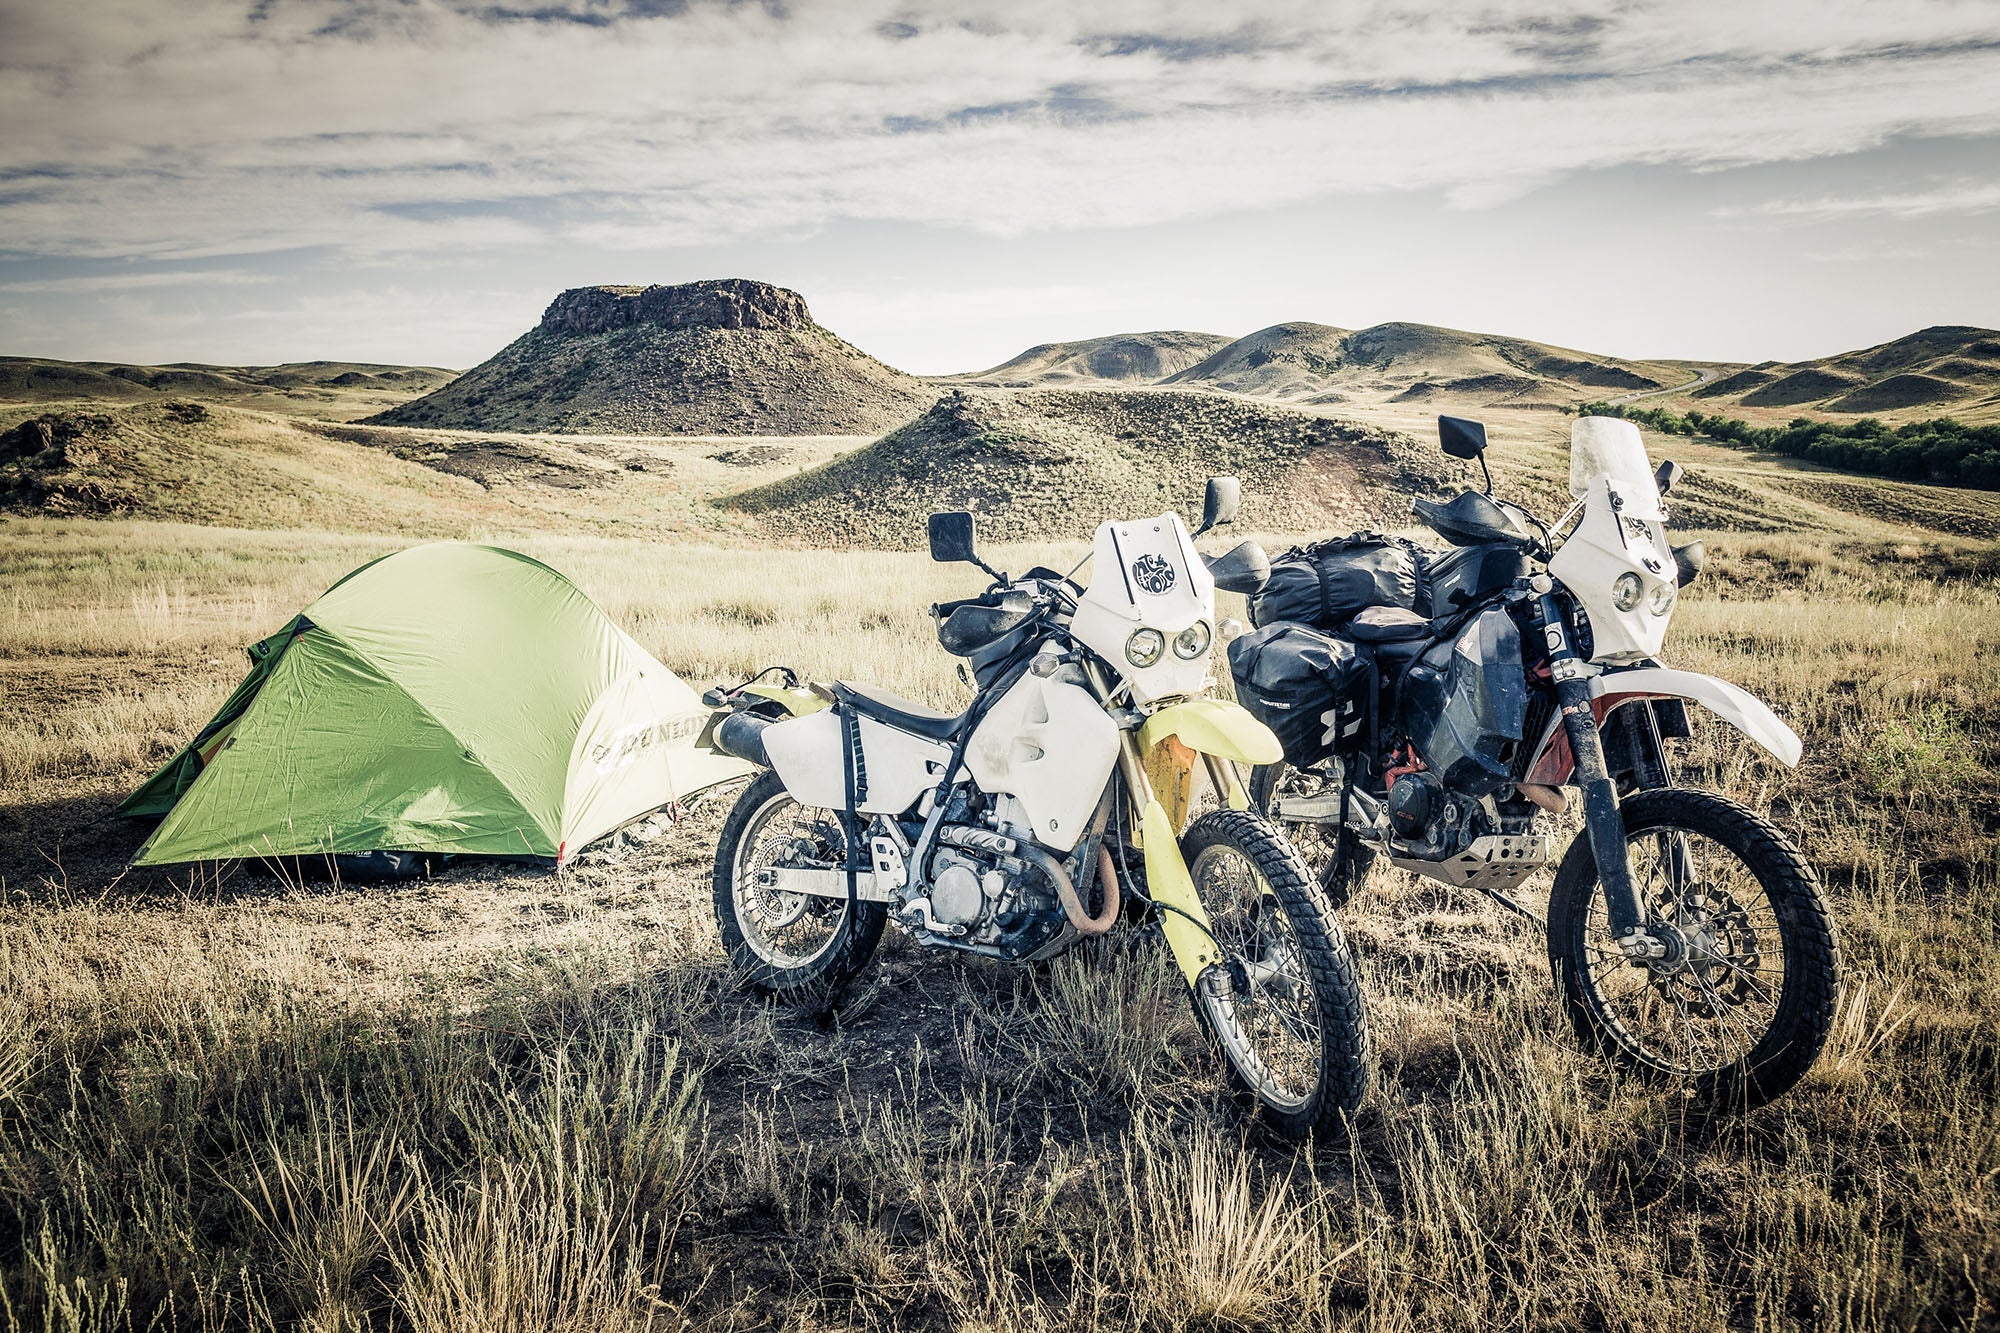 Motorcycle riding in Mongolia